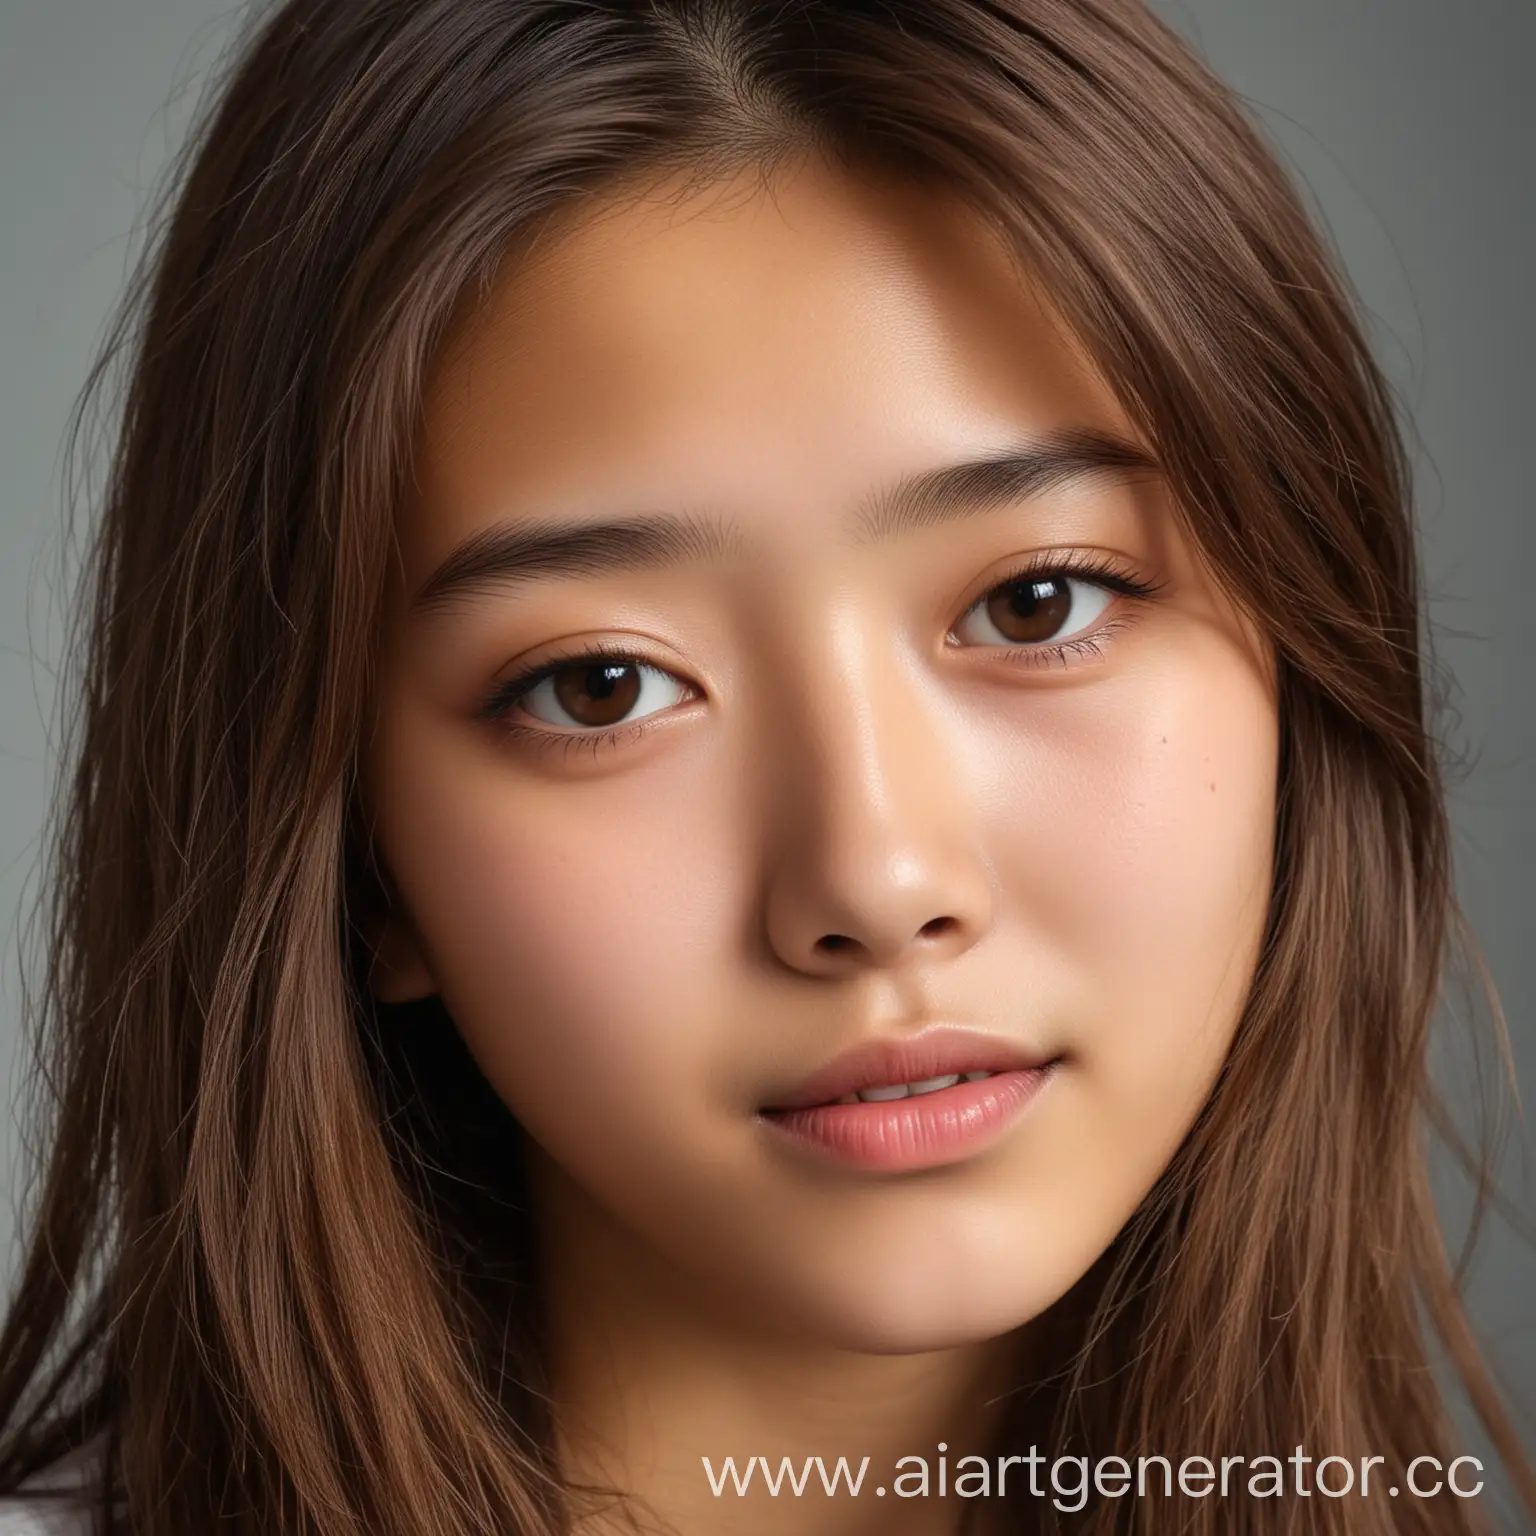 Portrait-of-a-BrownHaired-Asian-Teenage-Girl-19-Years-Old